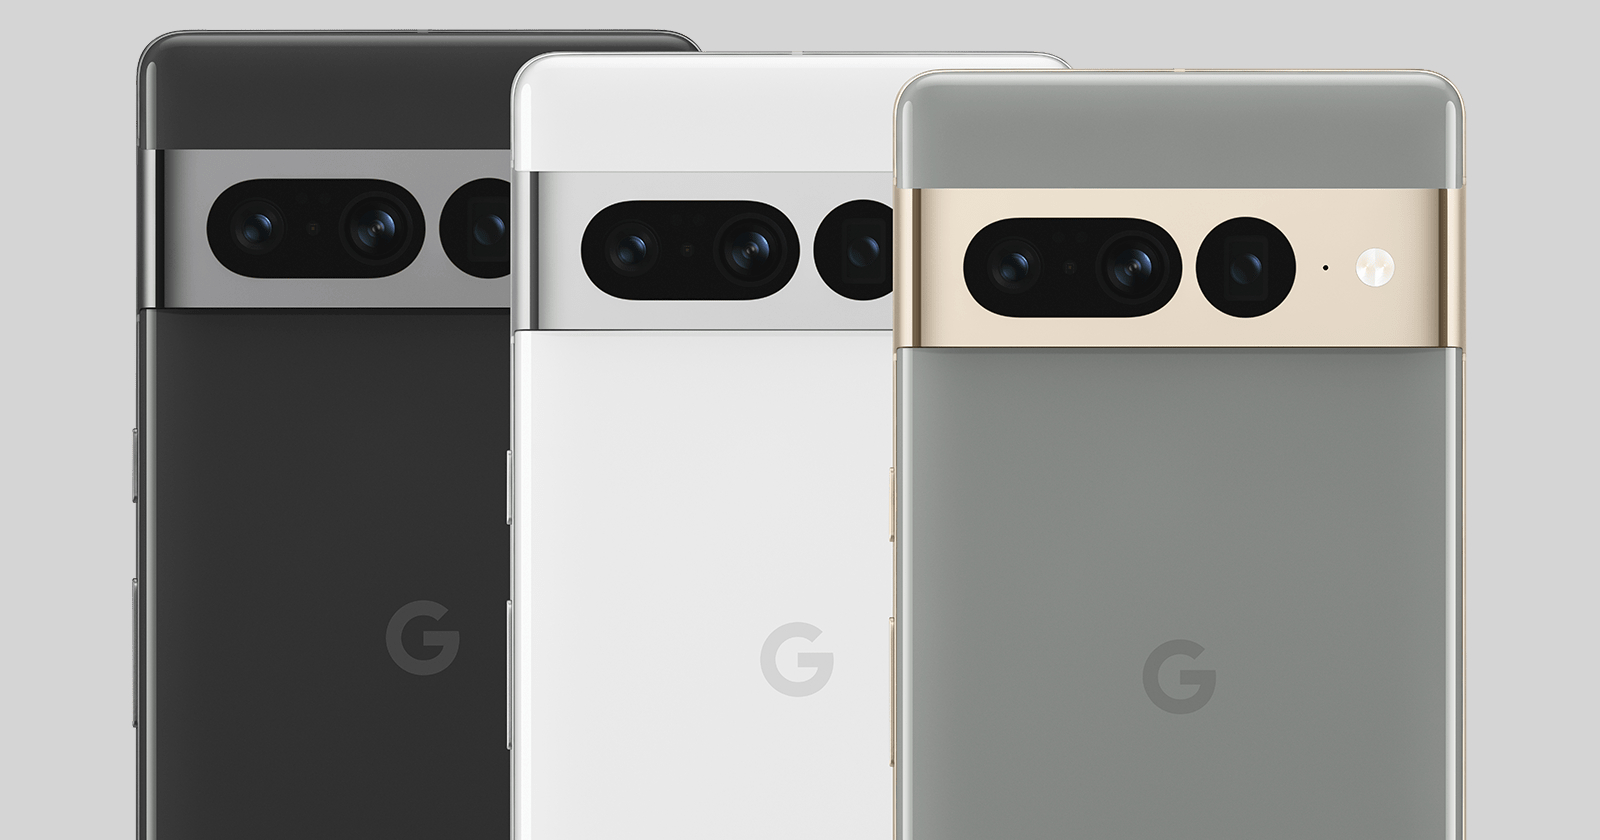 These Google Pixel phones support Ultra-wideband (UWB) in 2023